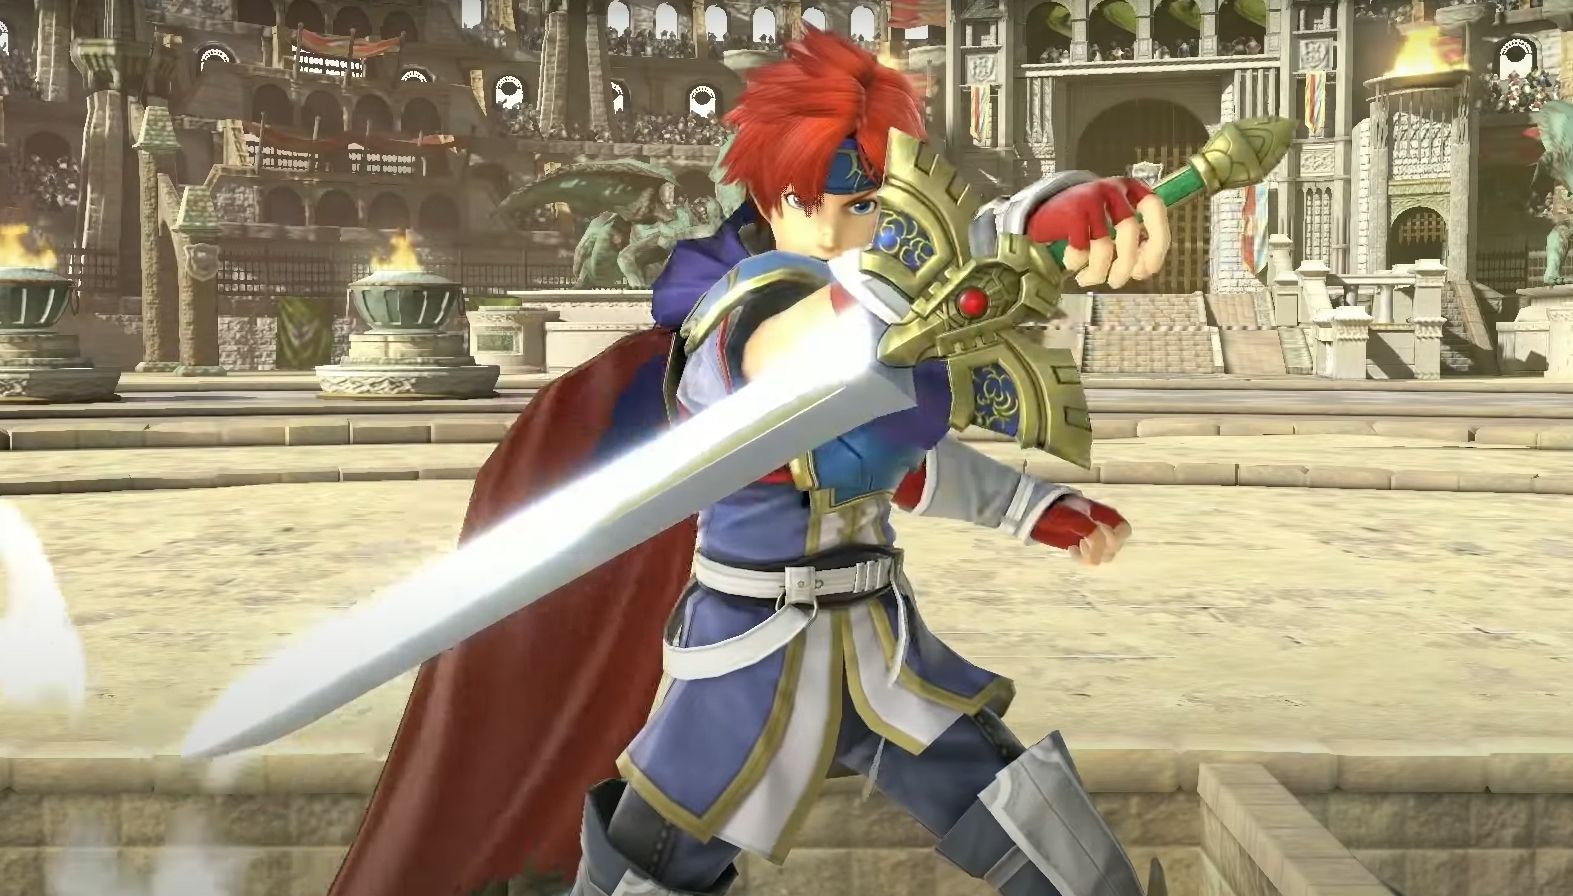 #2 - Roy is the most productive Fire Emblem sword consumer in Smash Ultimat...